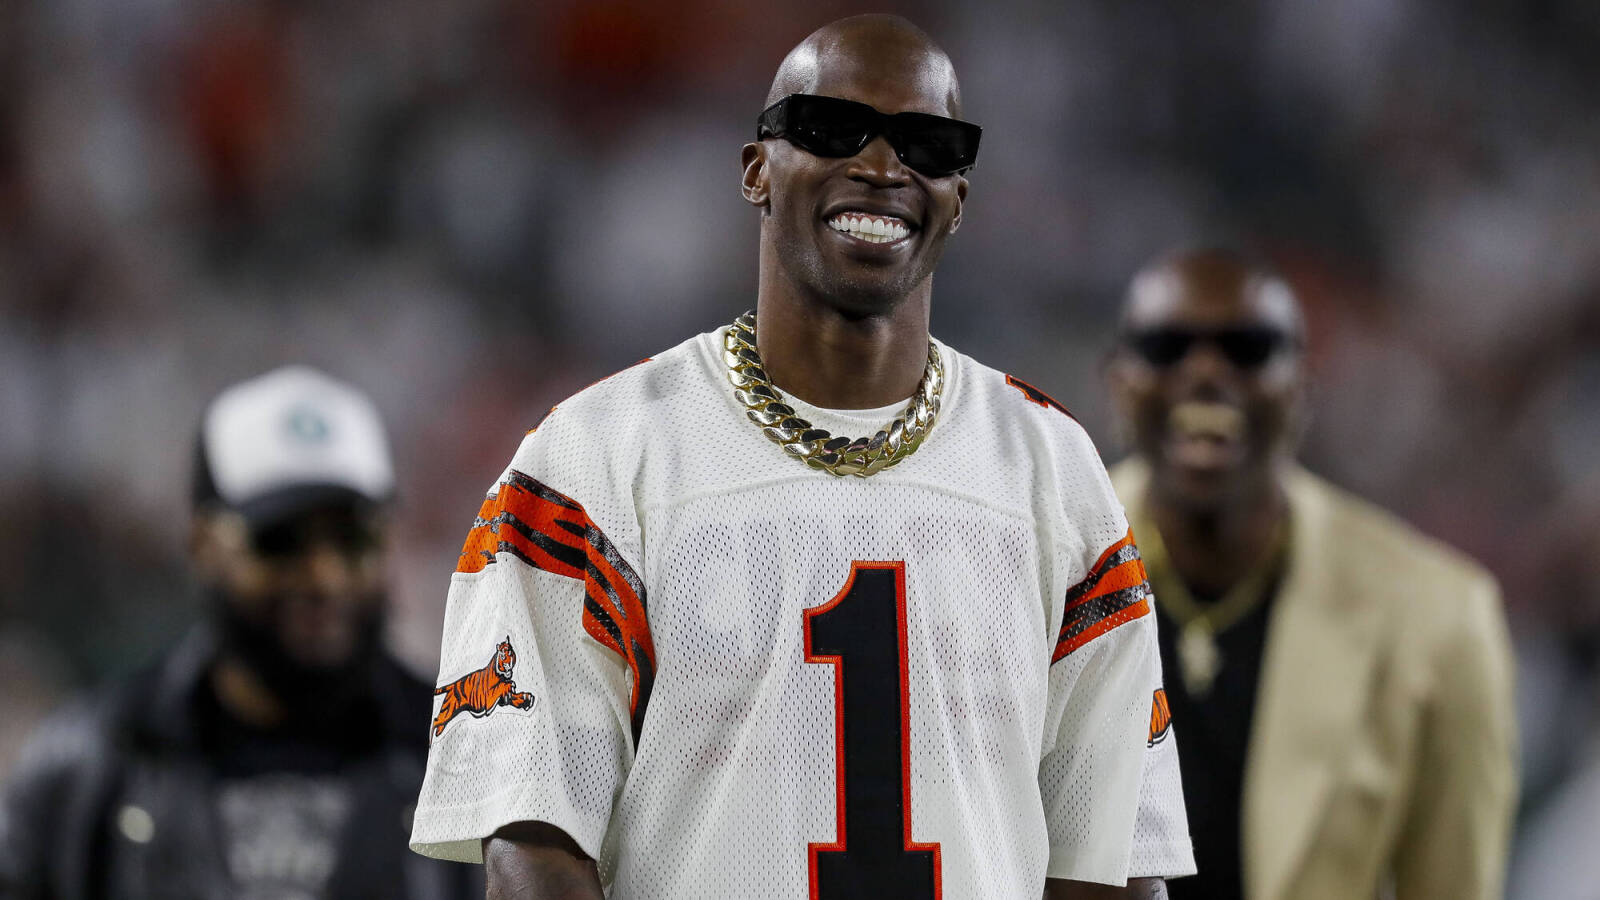 Former Pro Bowl WR Chad Johnson believes he can out-strike UFC star